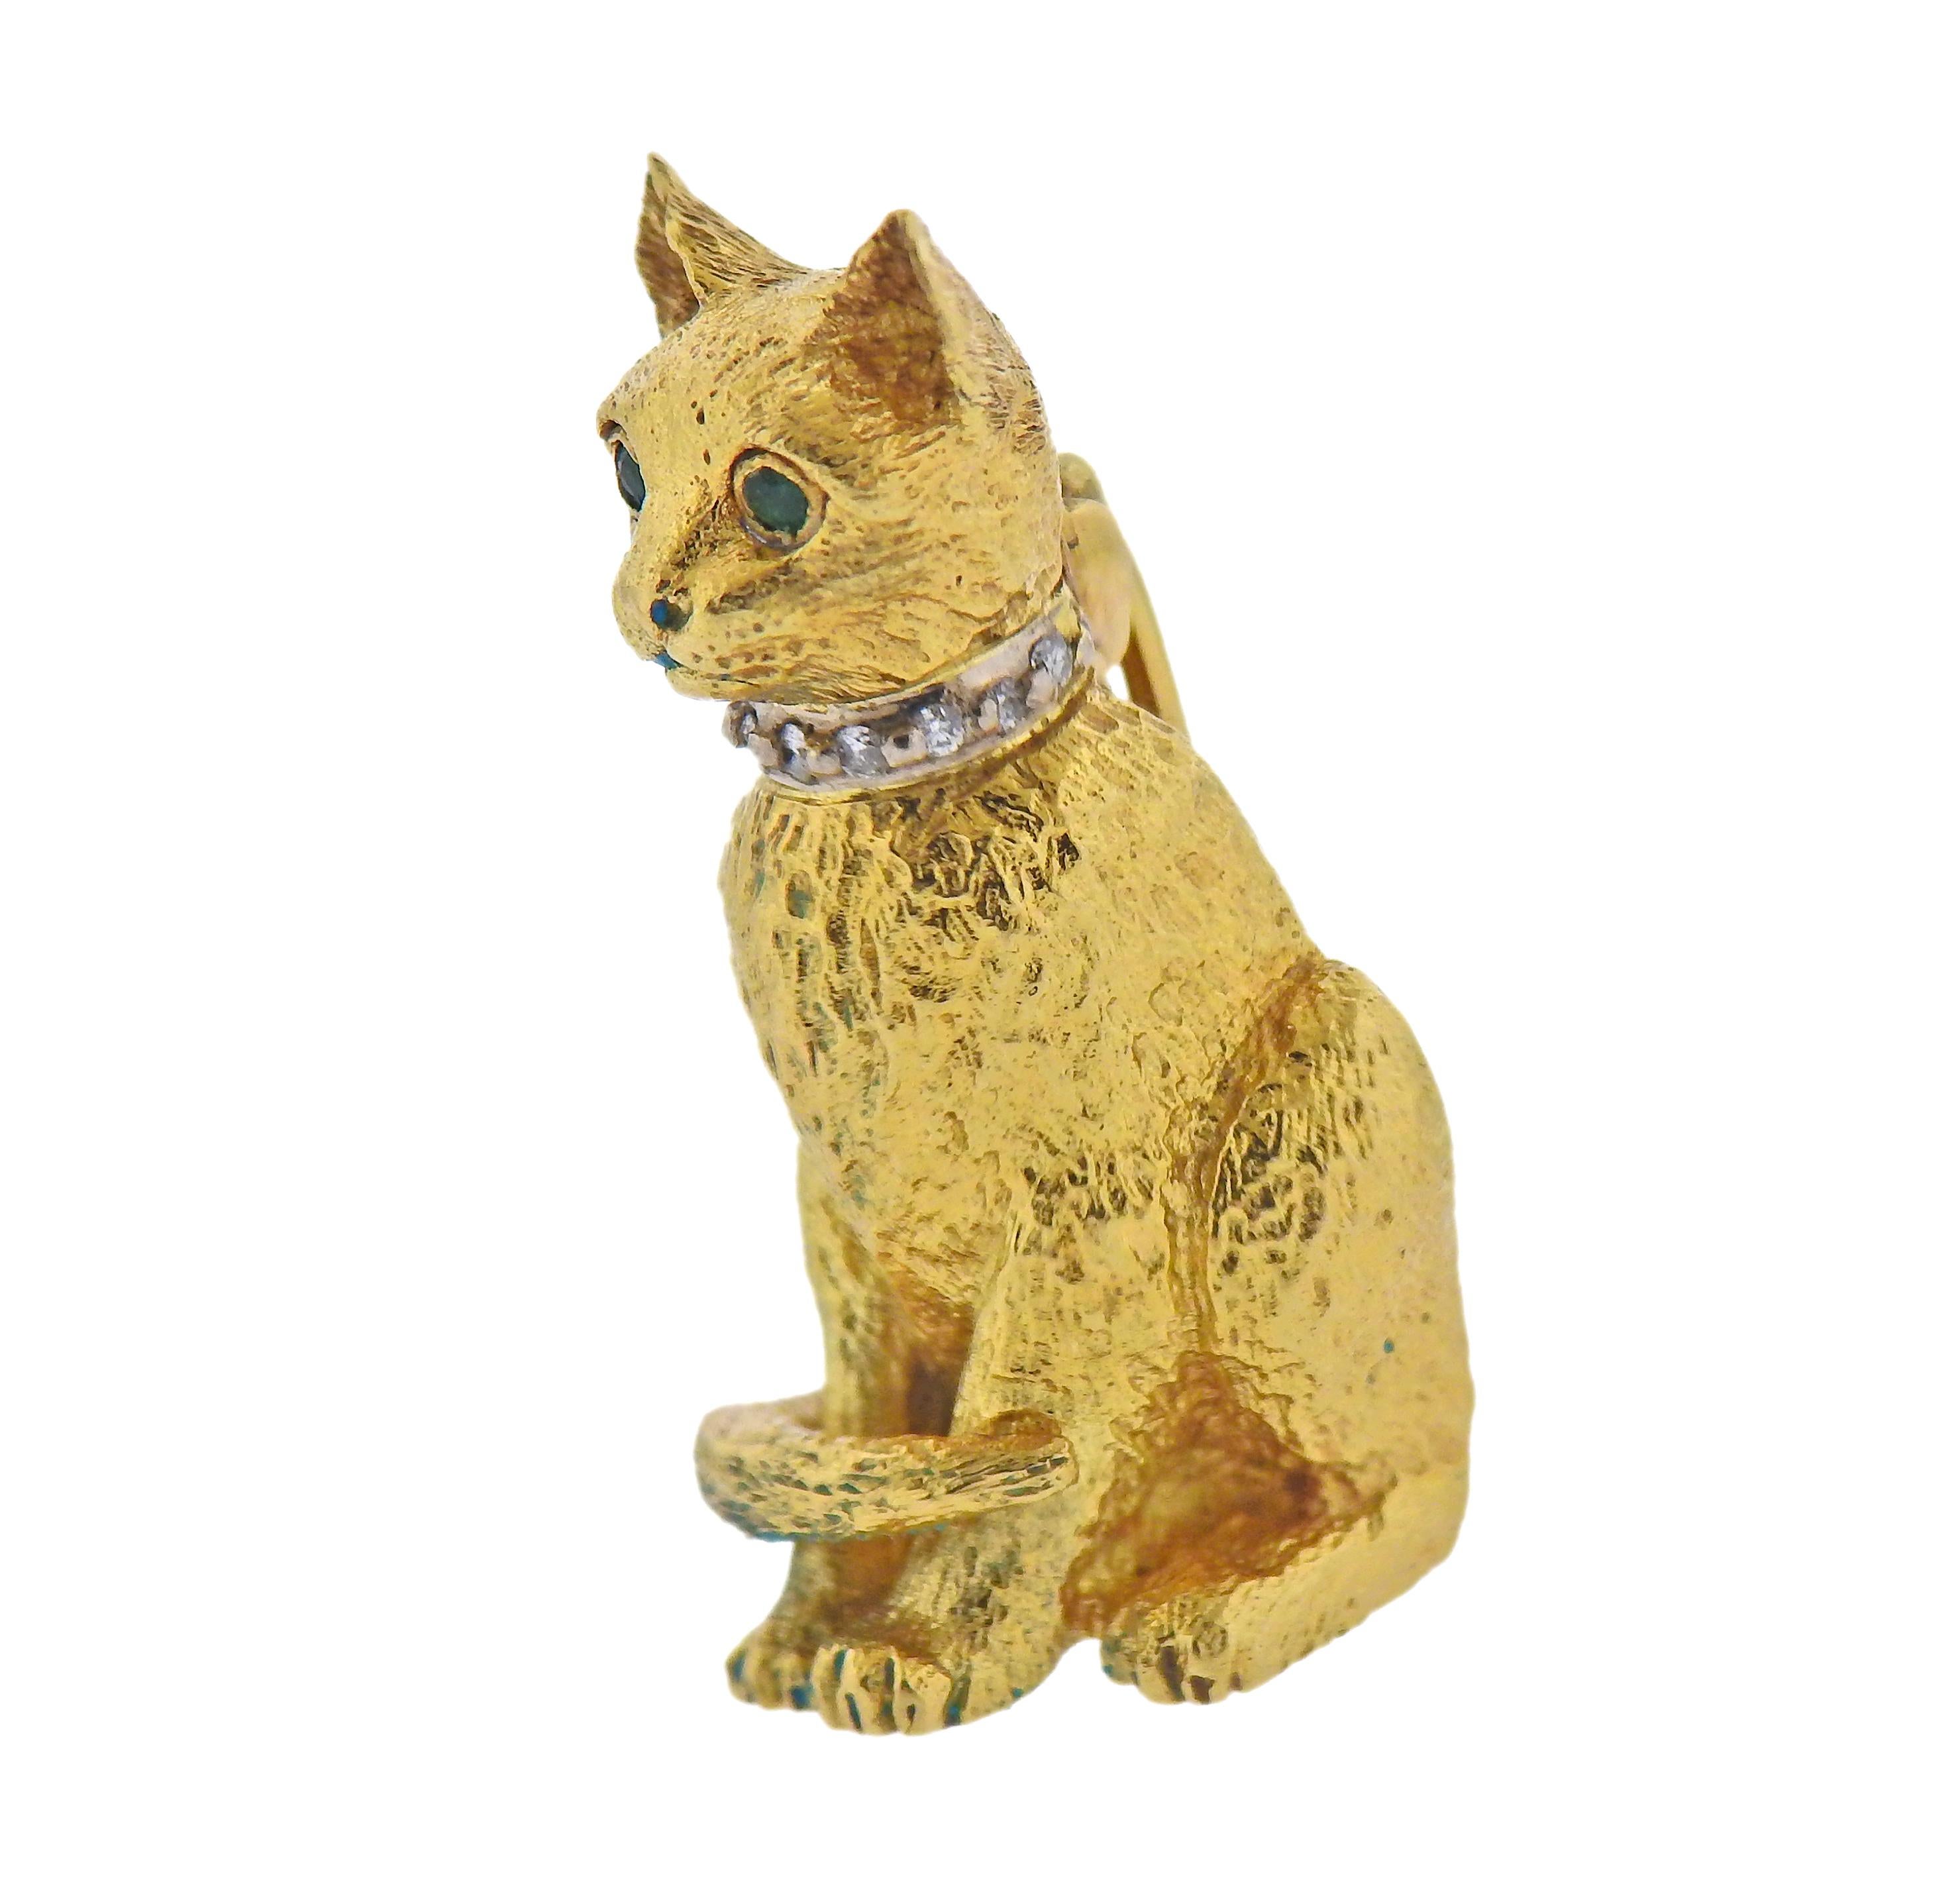 Tiffany & Co 18k gold cat brooch, with approx. 0.06cts in G/VS diamonds and emerald eyes. Brooch is 25mm x 13mm. Weight - 7.3 grams. Marked: Tiffany & Co, 750, 1991.